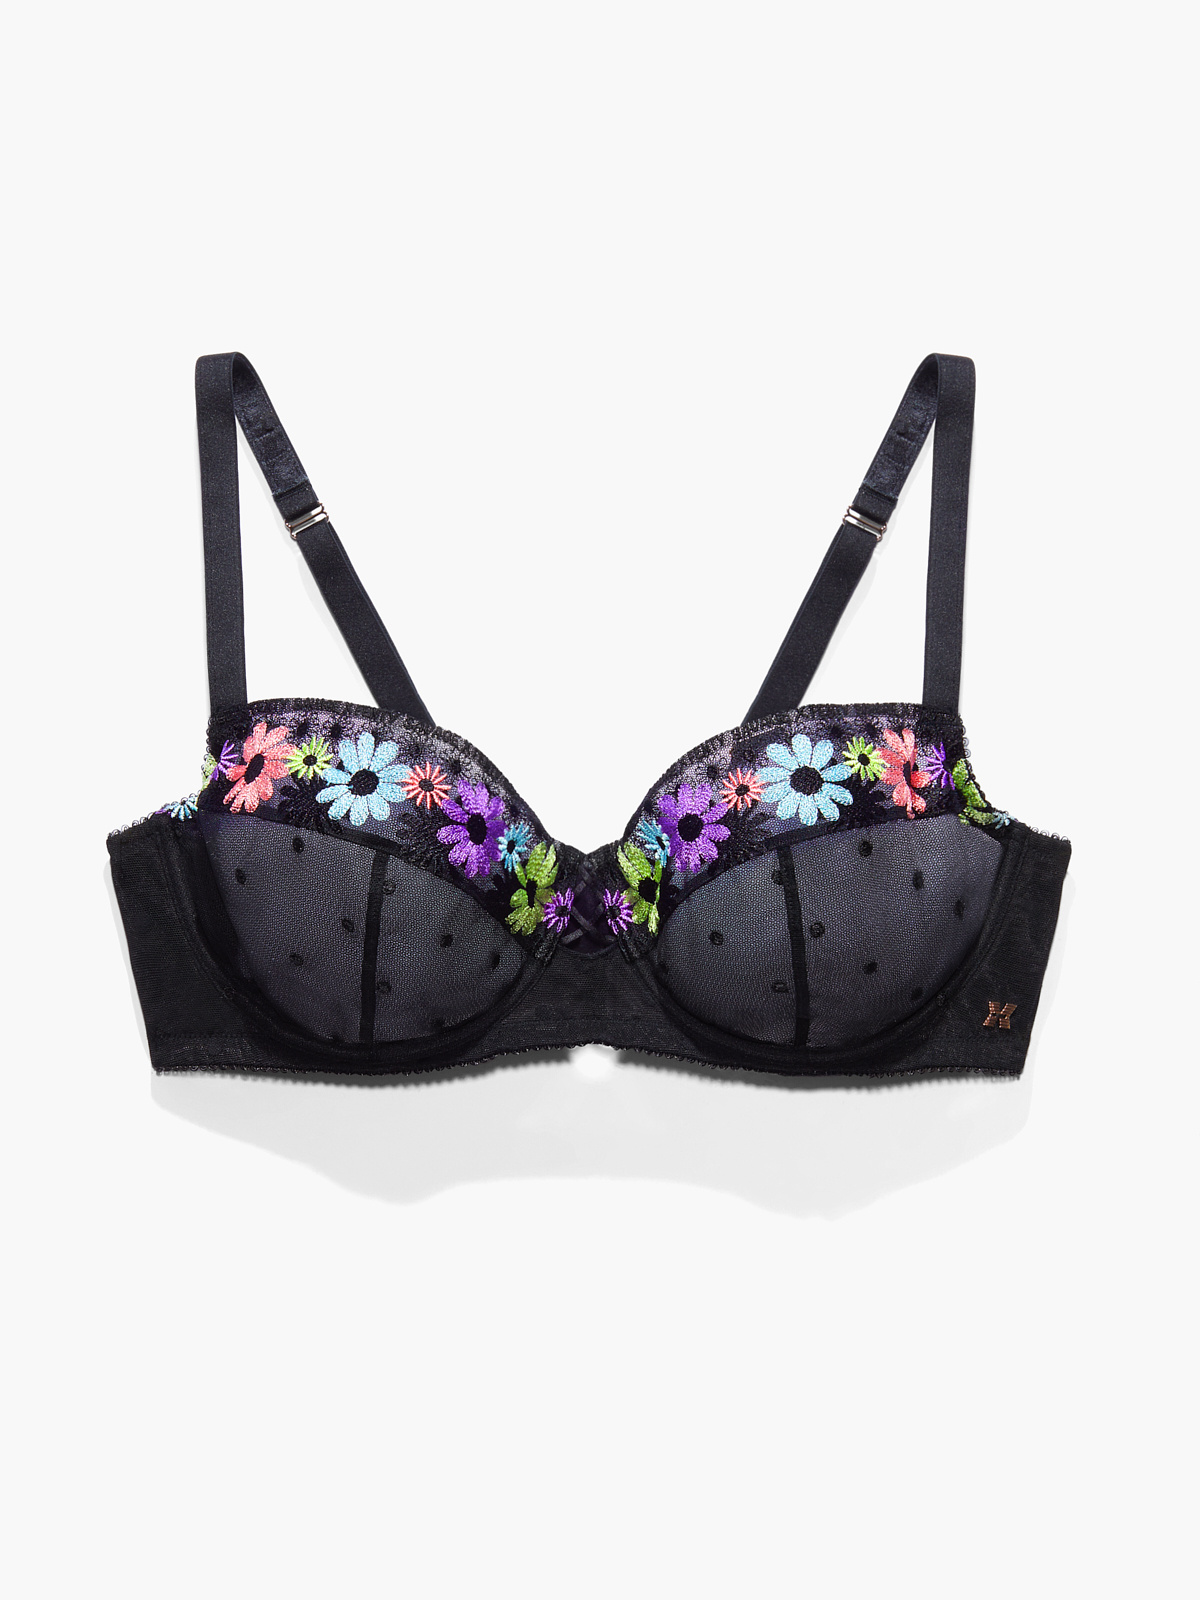 Free Spirit Floral Embroidery Unlined Balconette Bra in Black